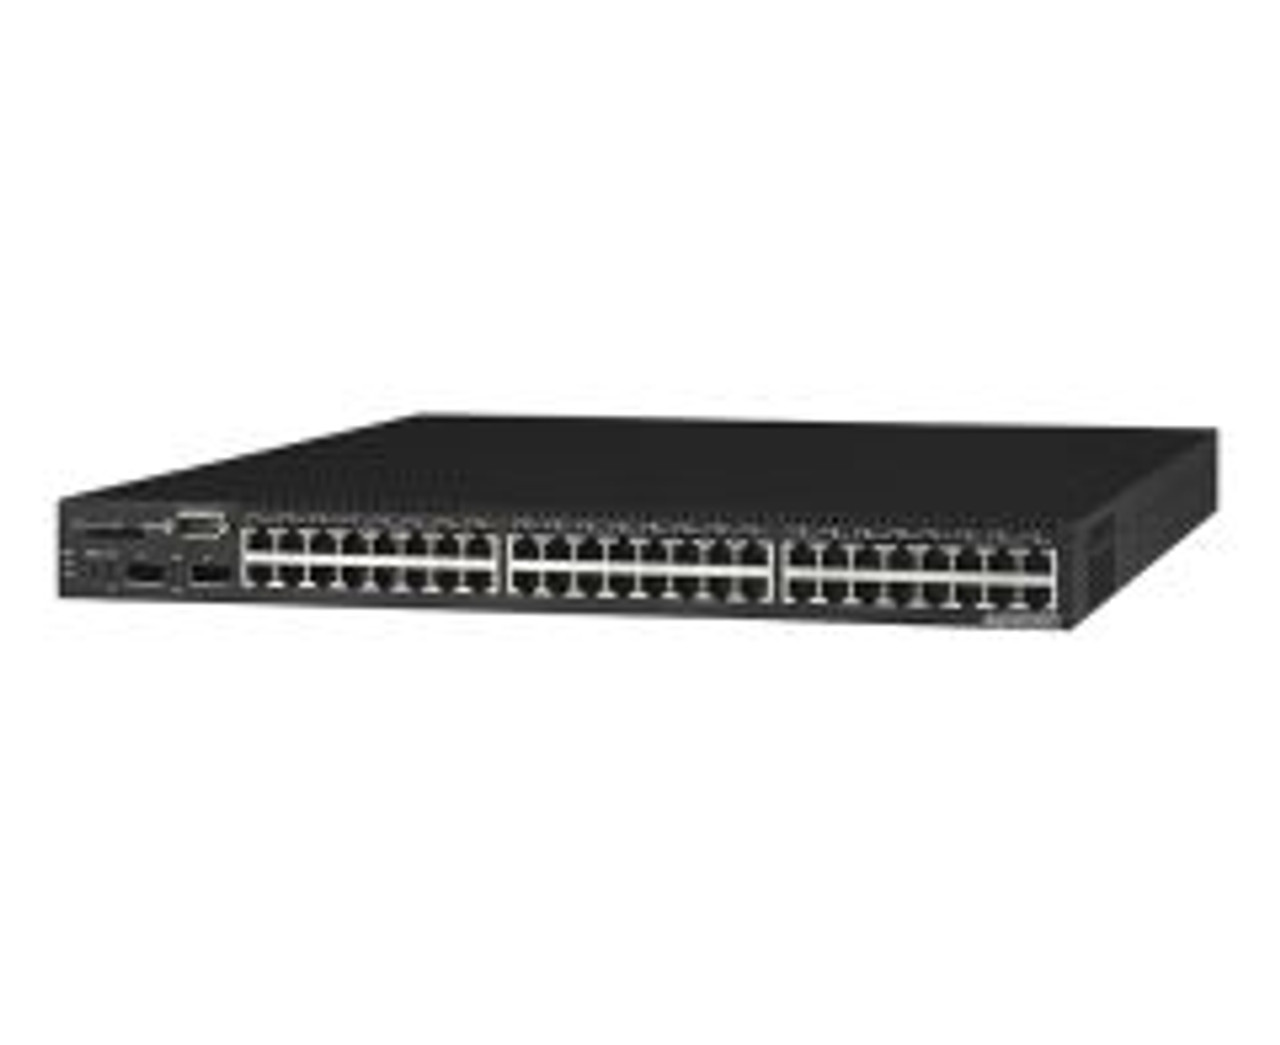 AT-FS201-10 | ALLIED TELESIS |Allied Telesyn At-Fs201 Ethernet Switch 2 X Lan Ethernet Switch